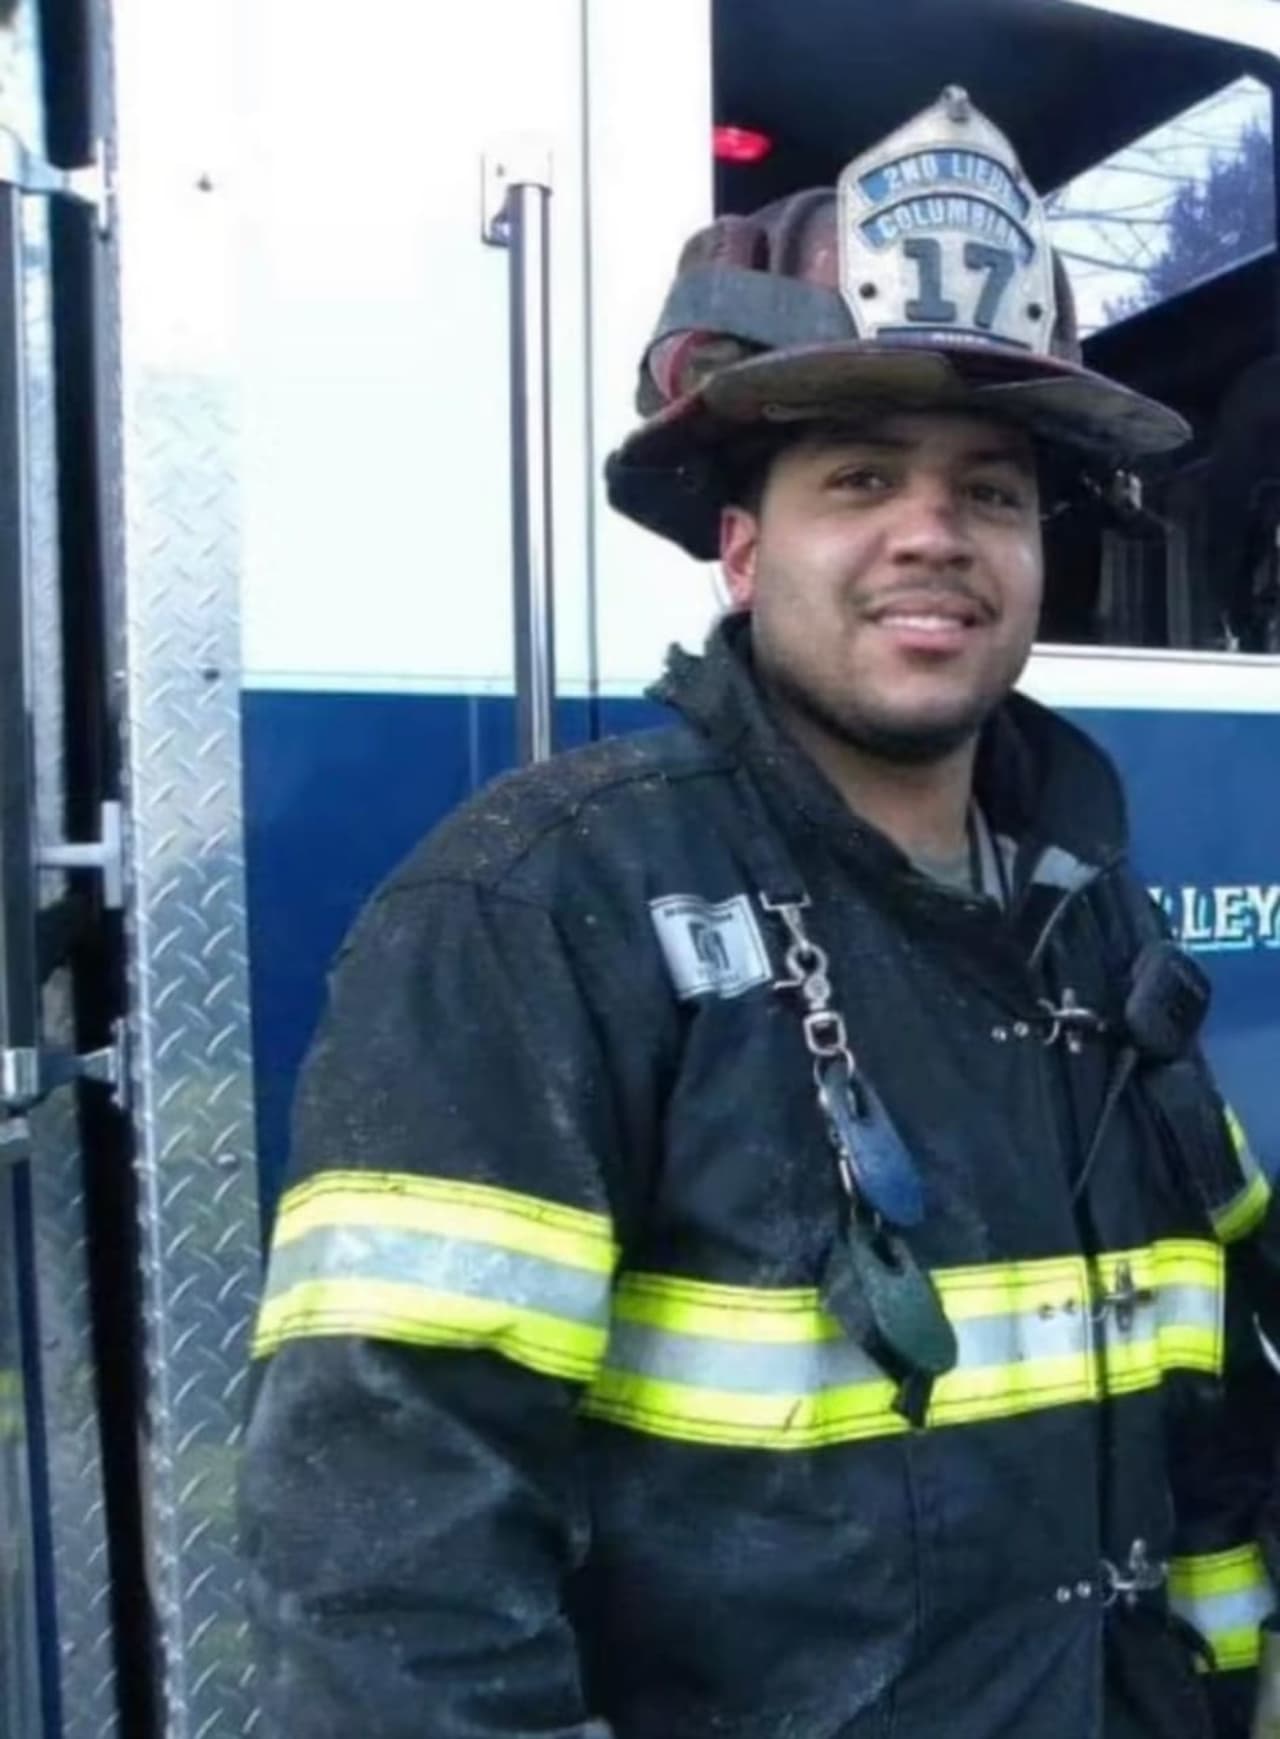 Spring Valley Firefighter Jared Lloyd was killed during the fire at the Evergreen Court Home for Adults while rescuing residents.